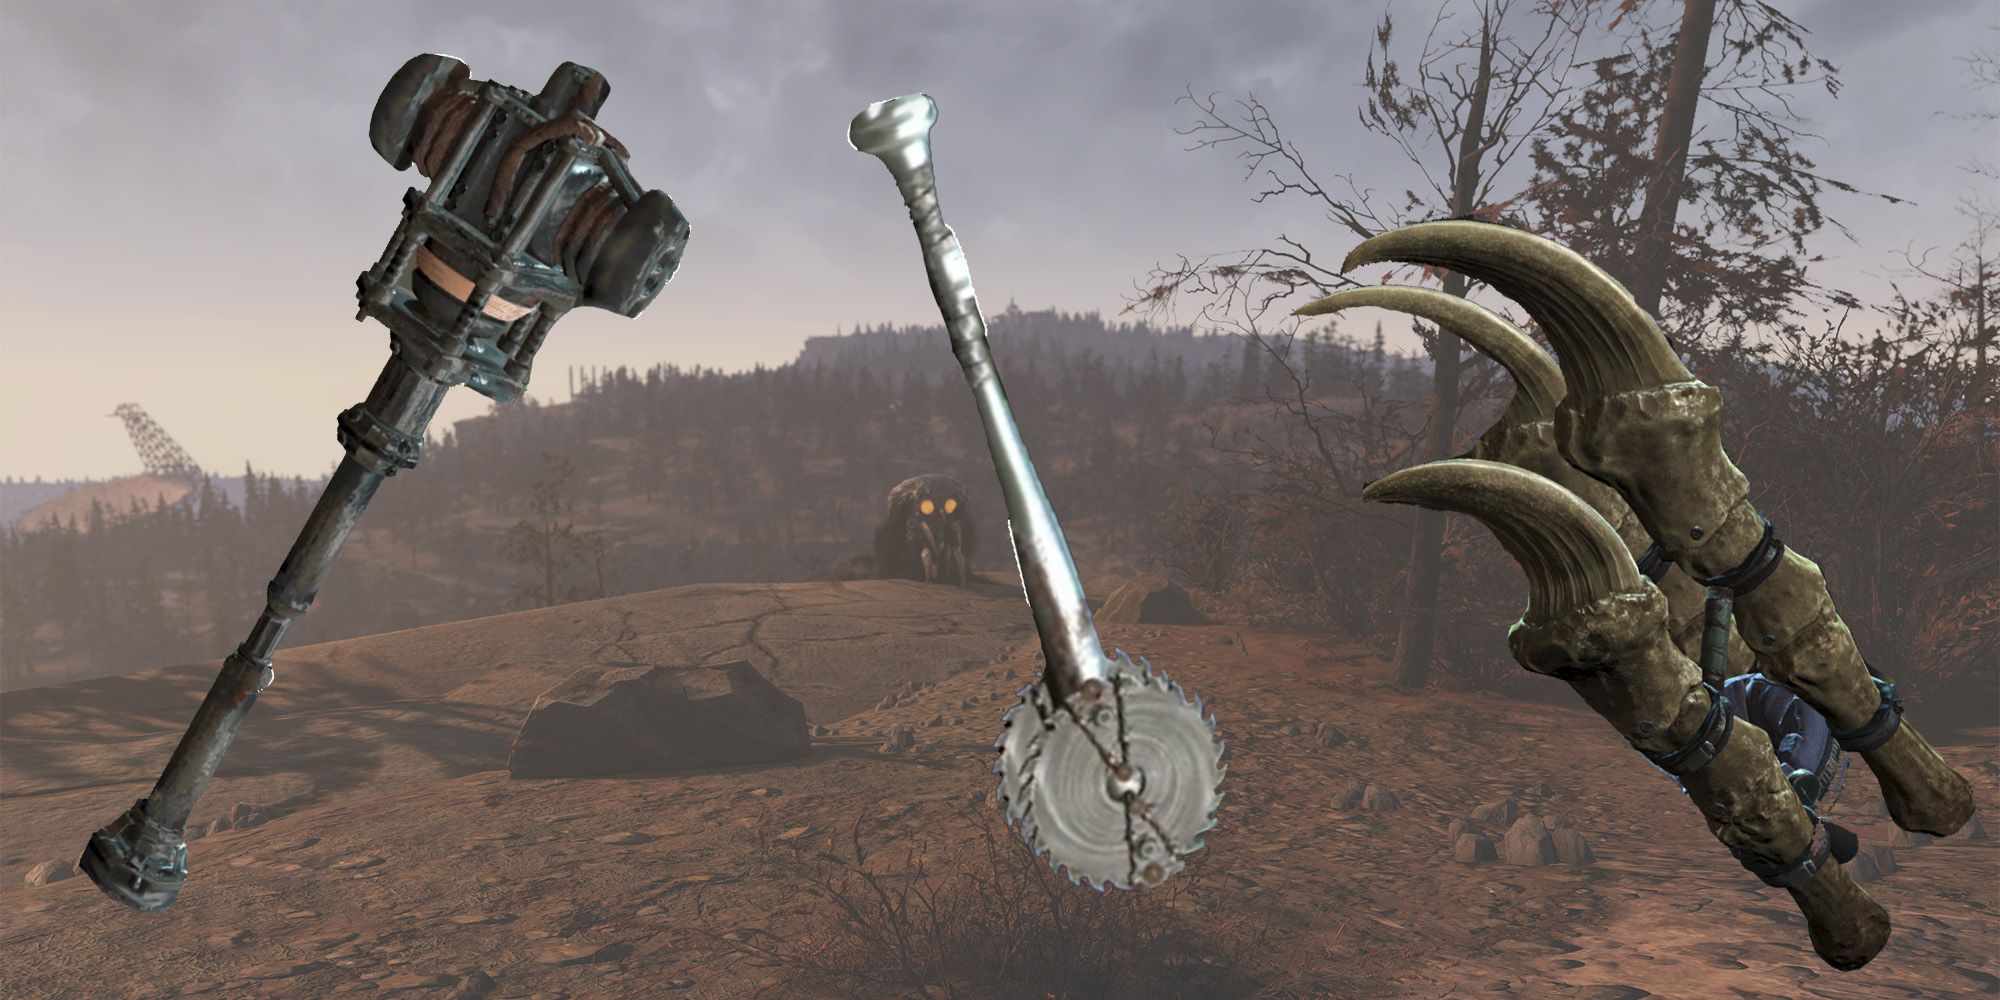 Bloodied Melee Weapons from Fallout 76 including a Super Sledge, a Bladed Aluminum Bat, and the Clever Girl Deathclaw Gauntlet.